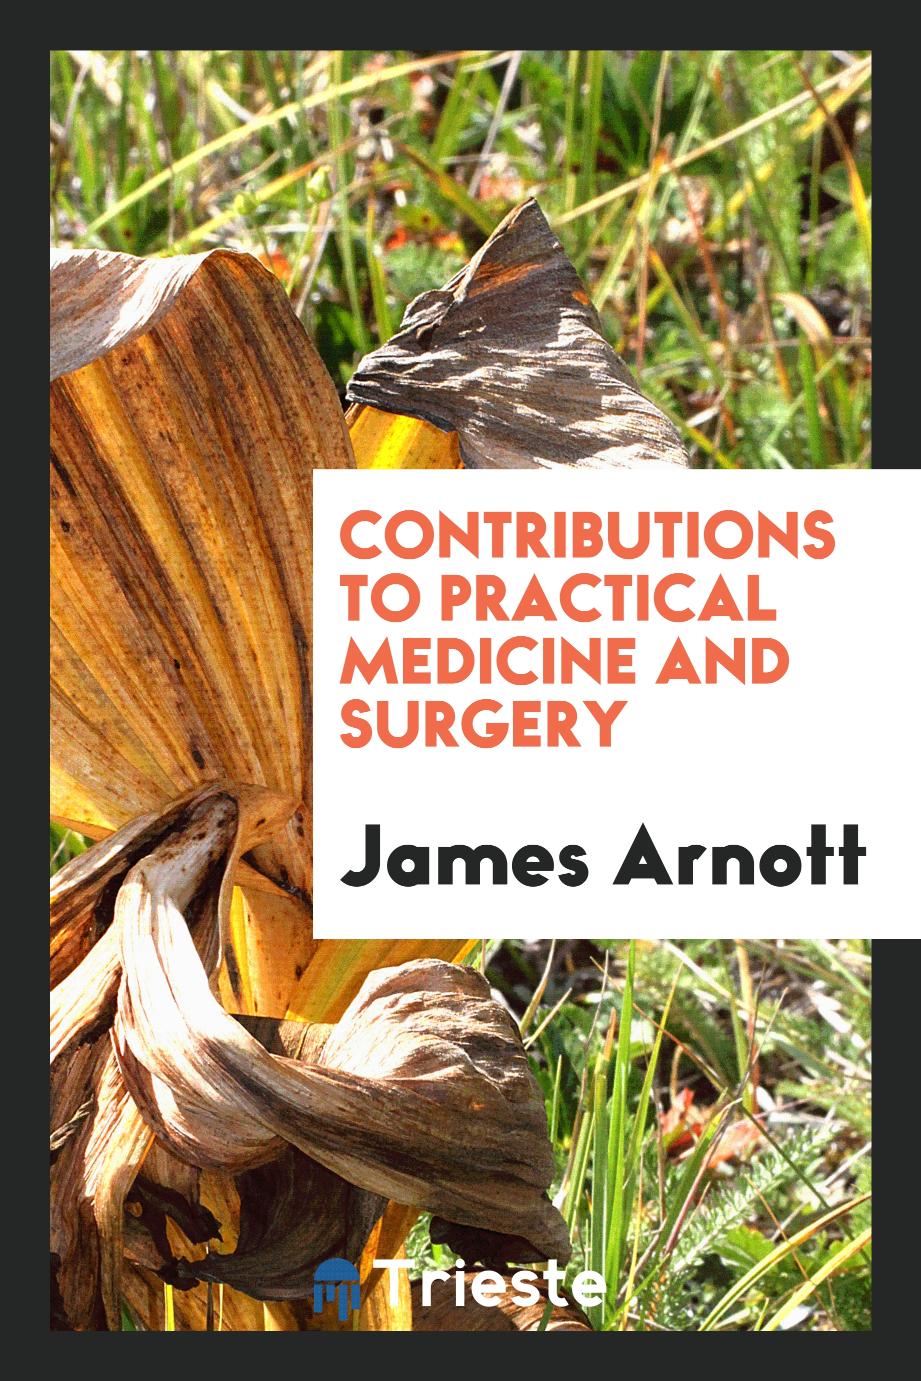 Contributions to practical medicine and surgery